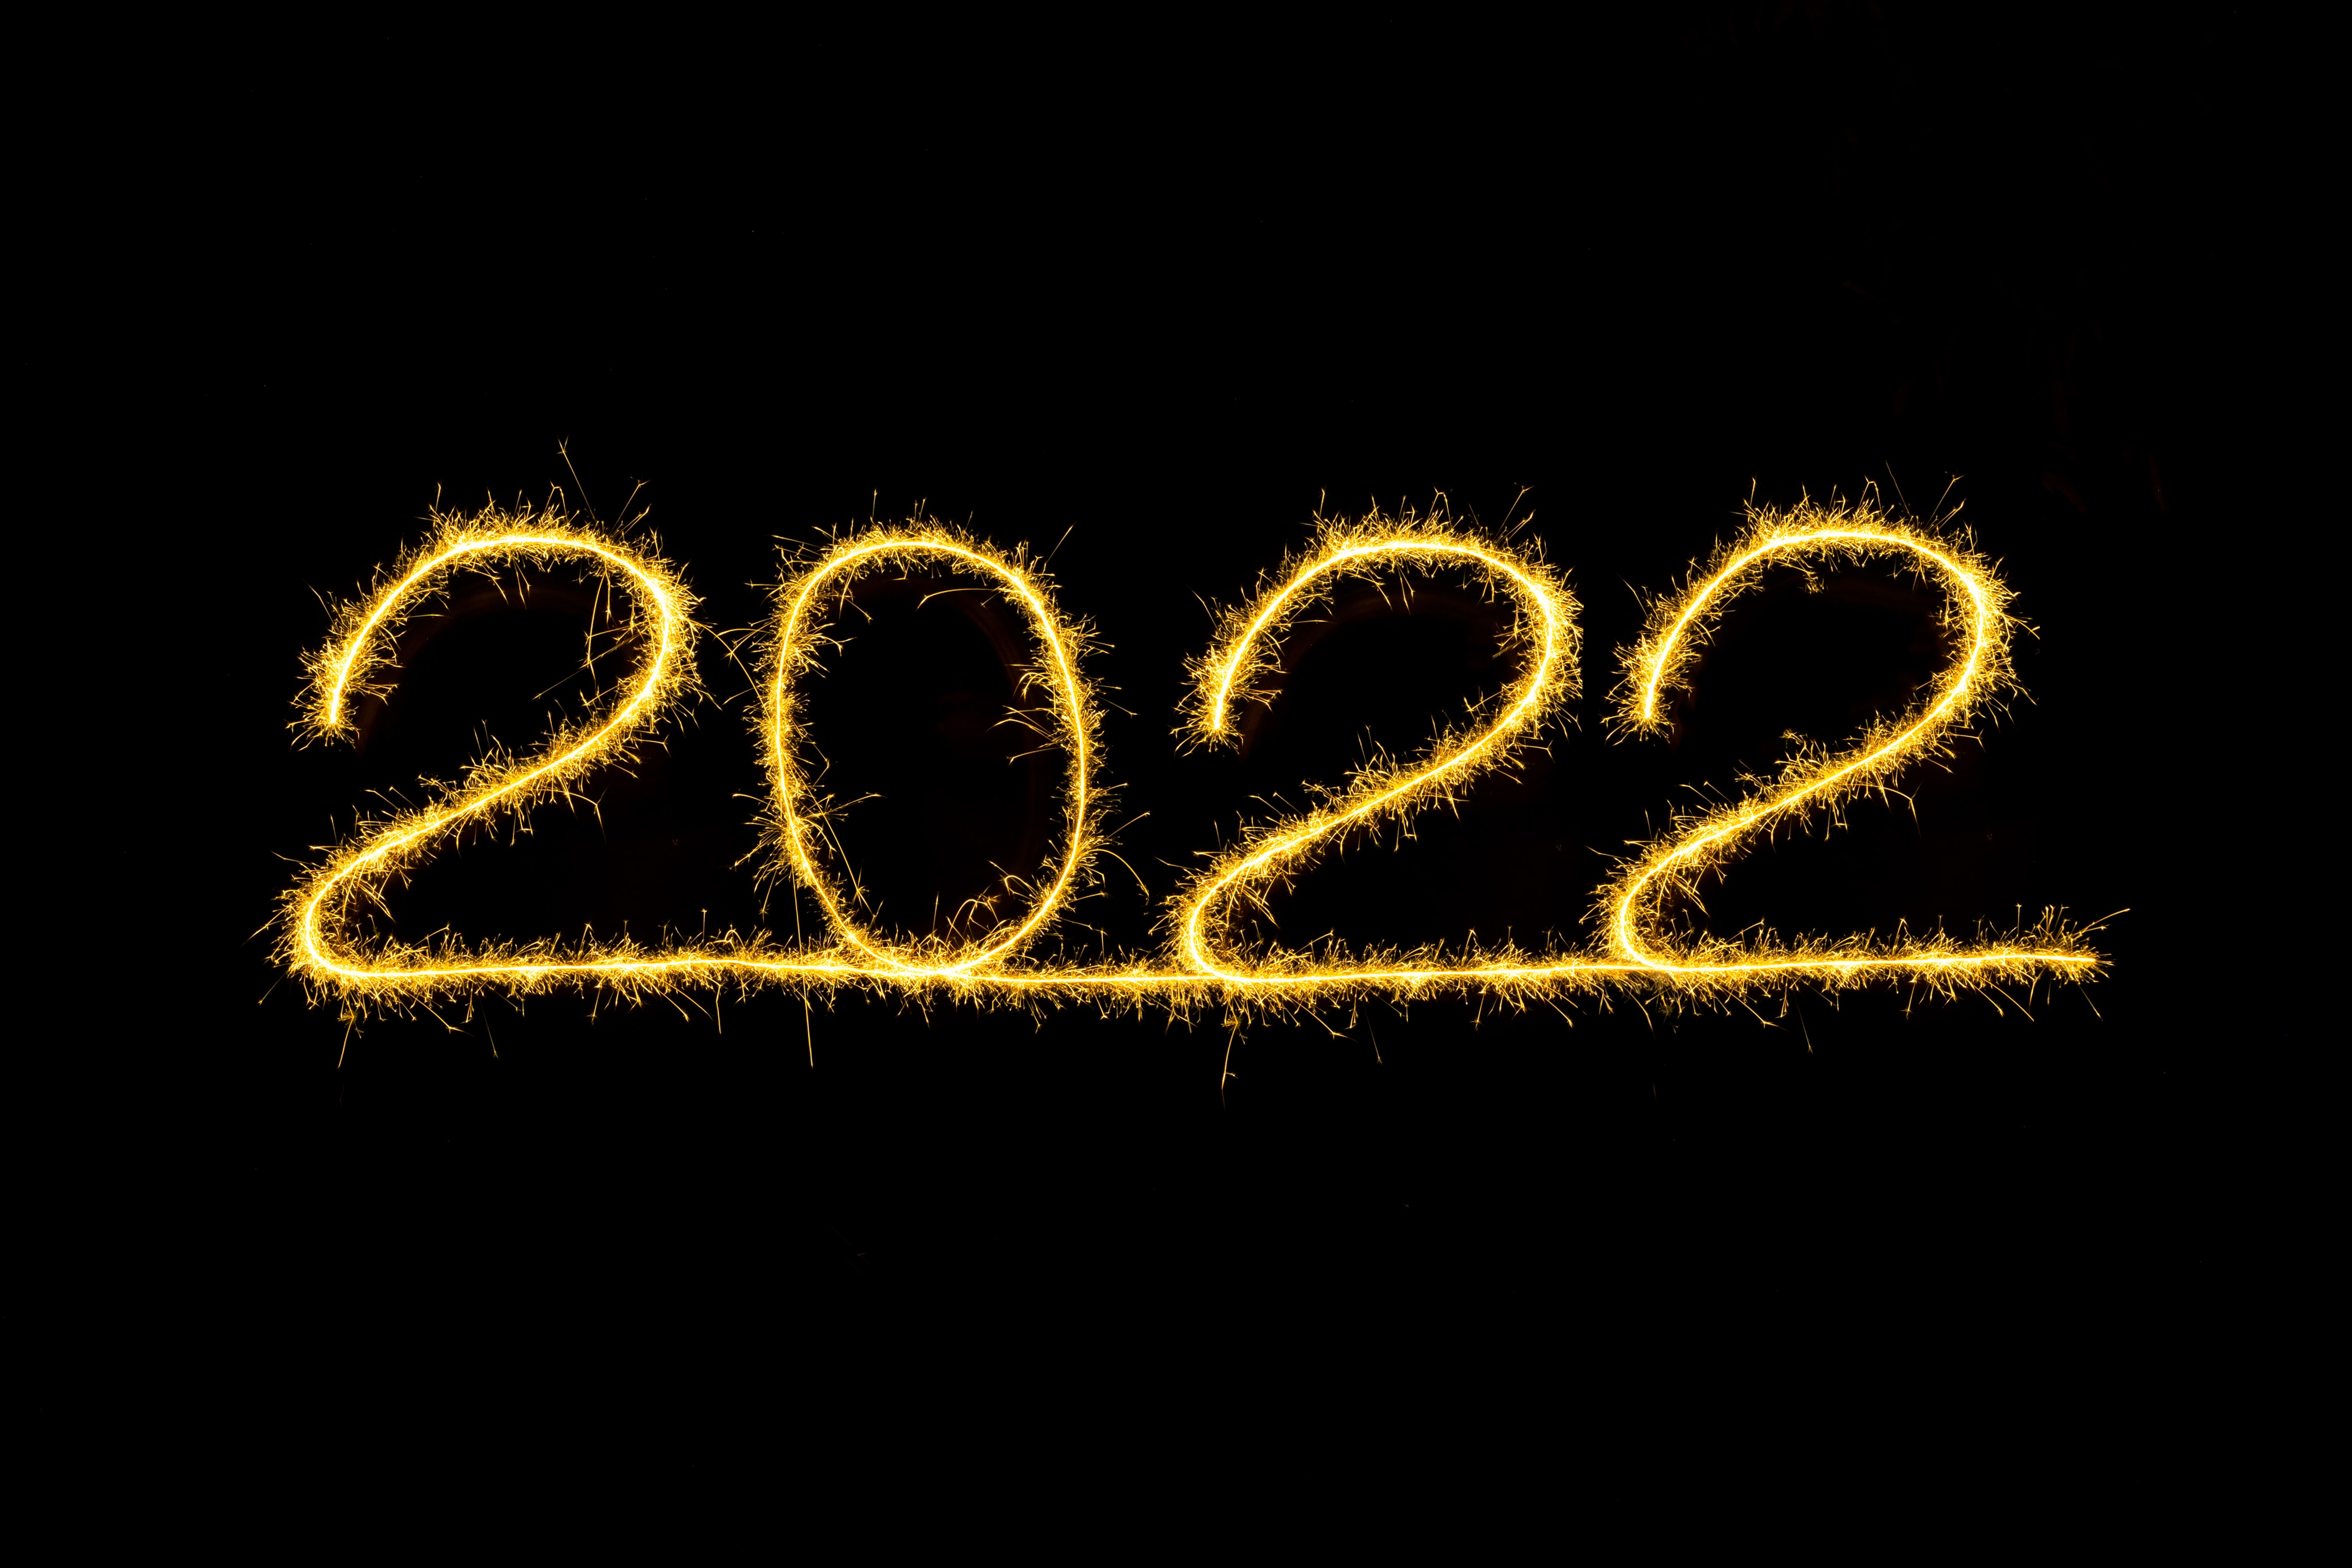 PR trends to monitor in 2022